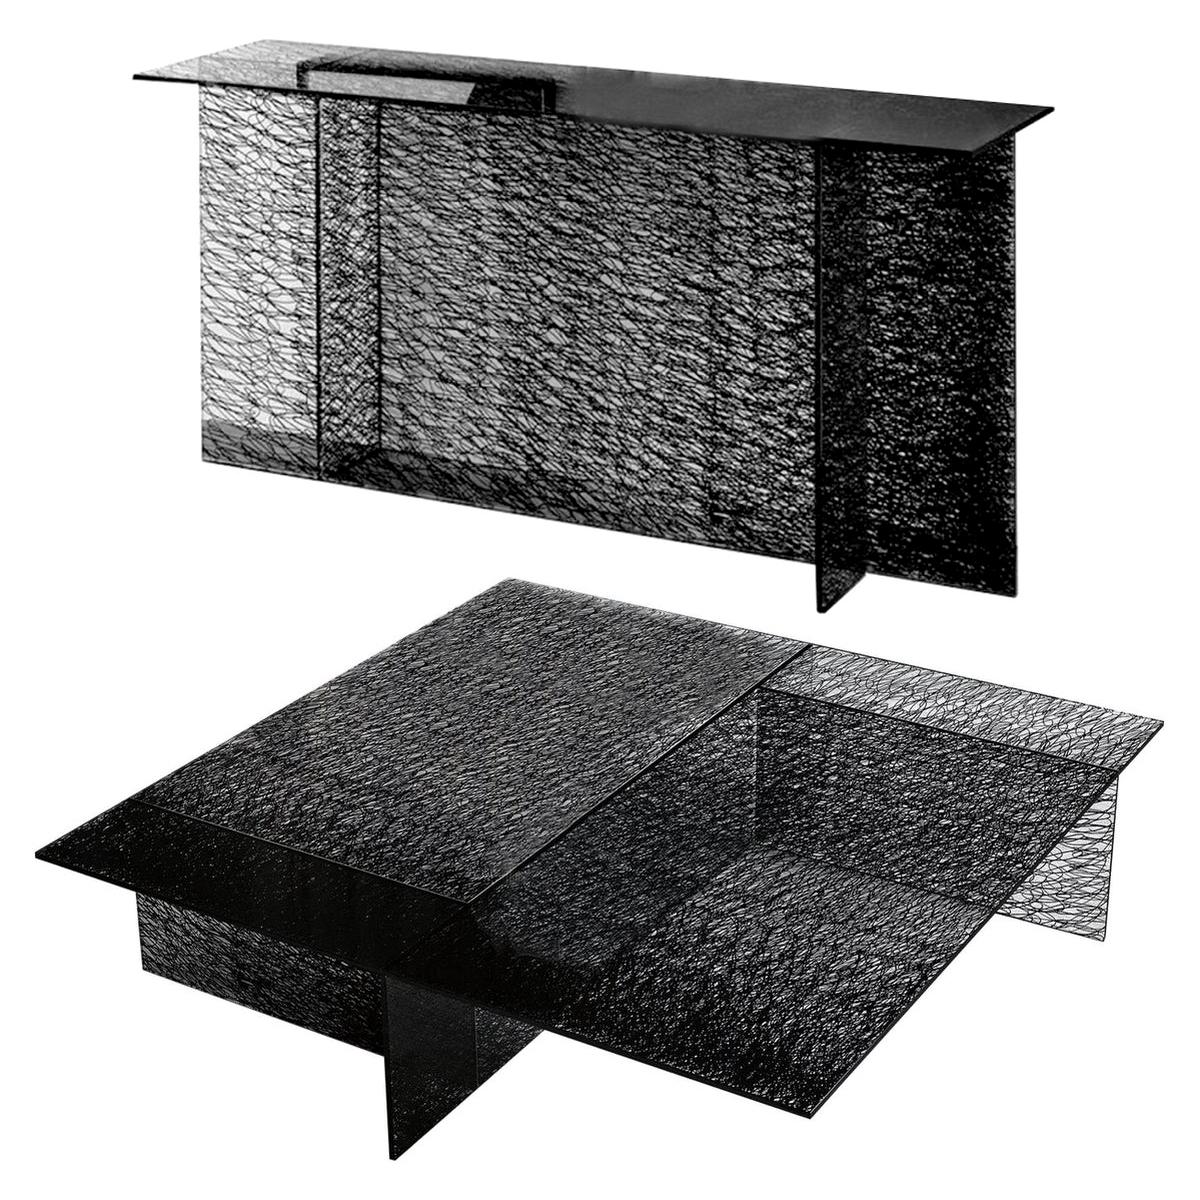 Set of Sestante Black Glass Coffee Table and Console For Sale